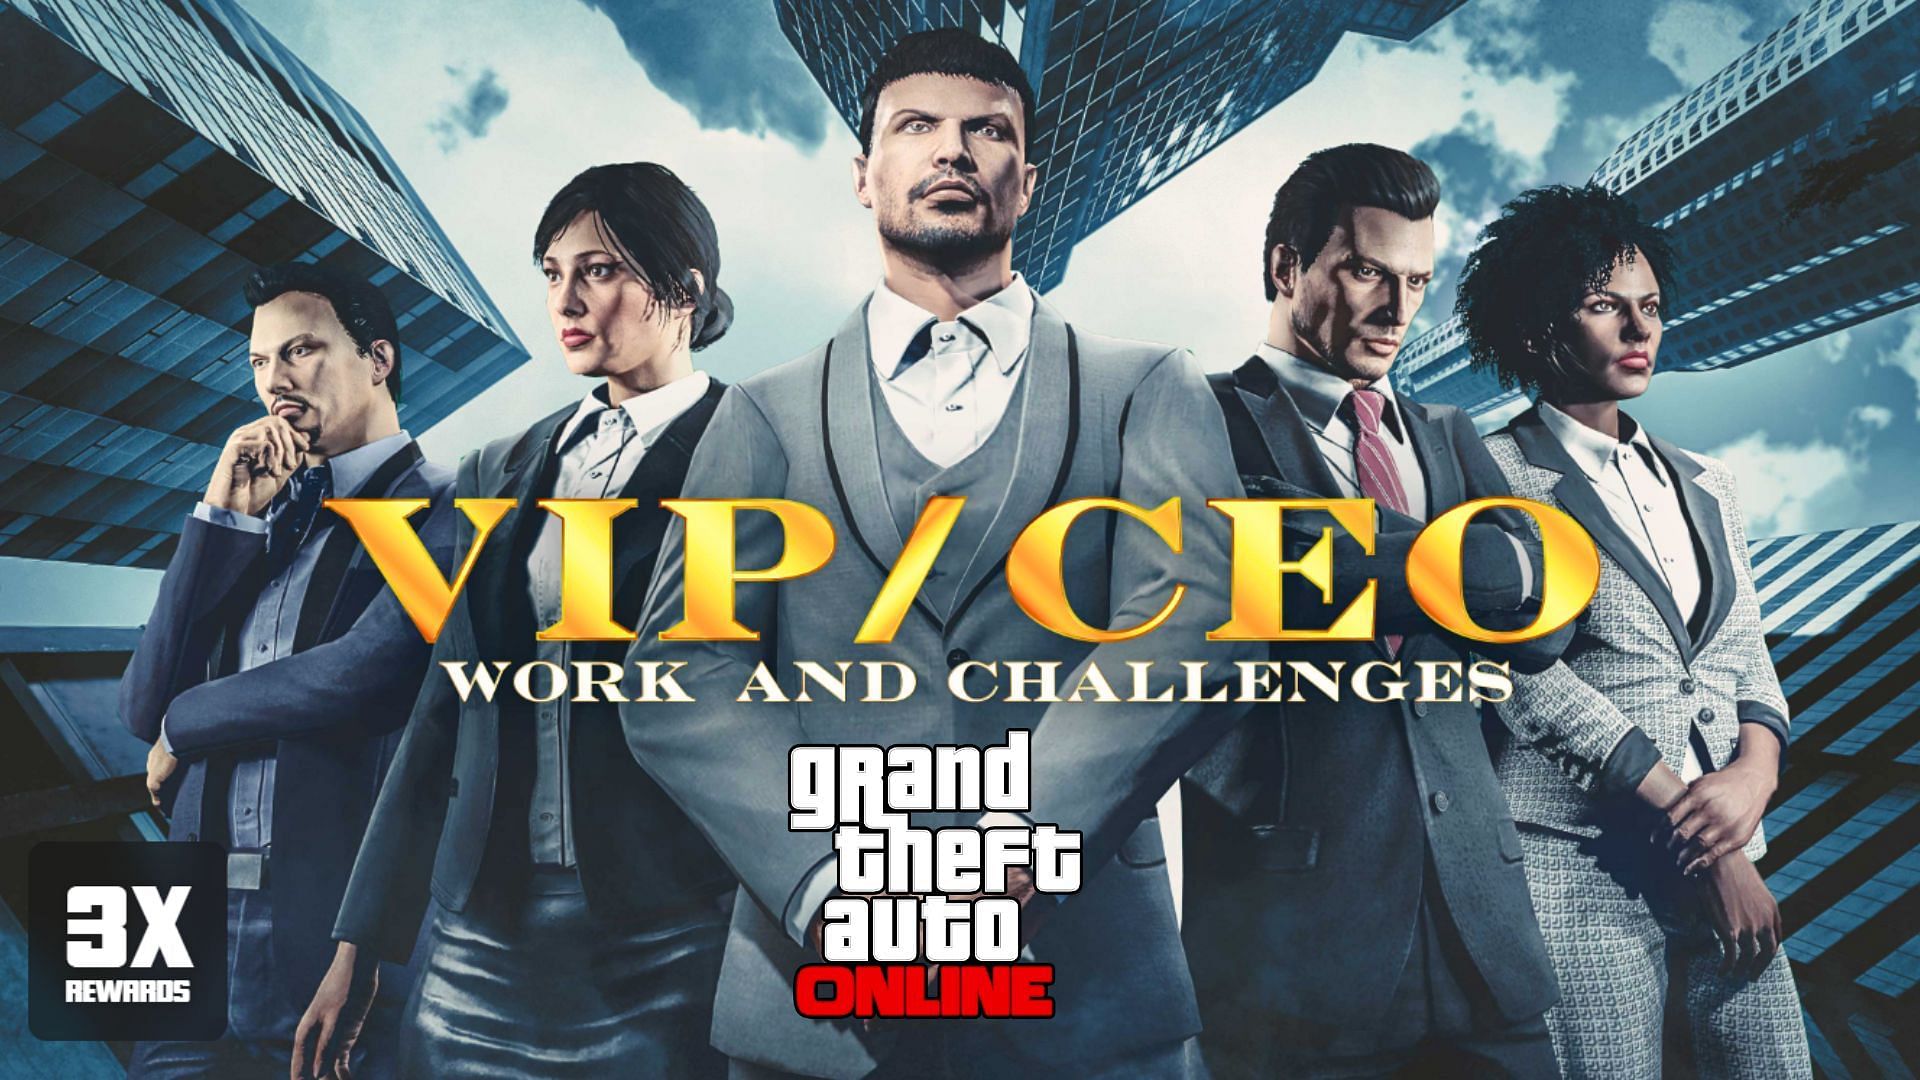 The VIP Work missions are currently the most lucrative missions in GTA Online (Image via Rockstar Games)